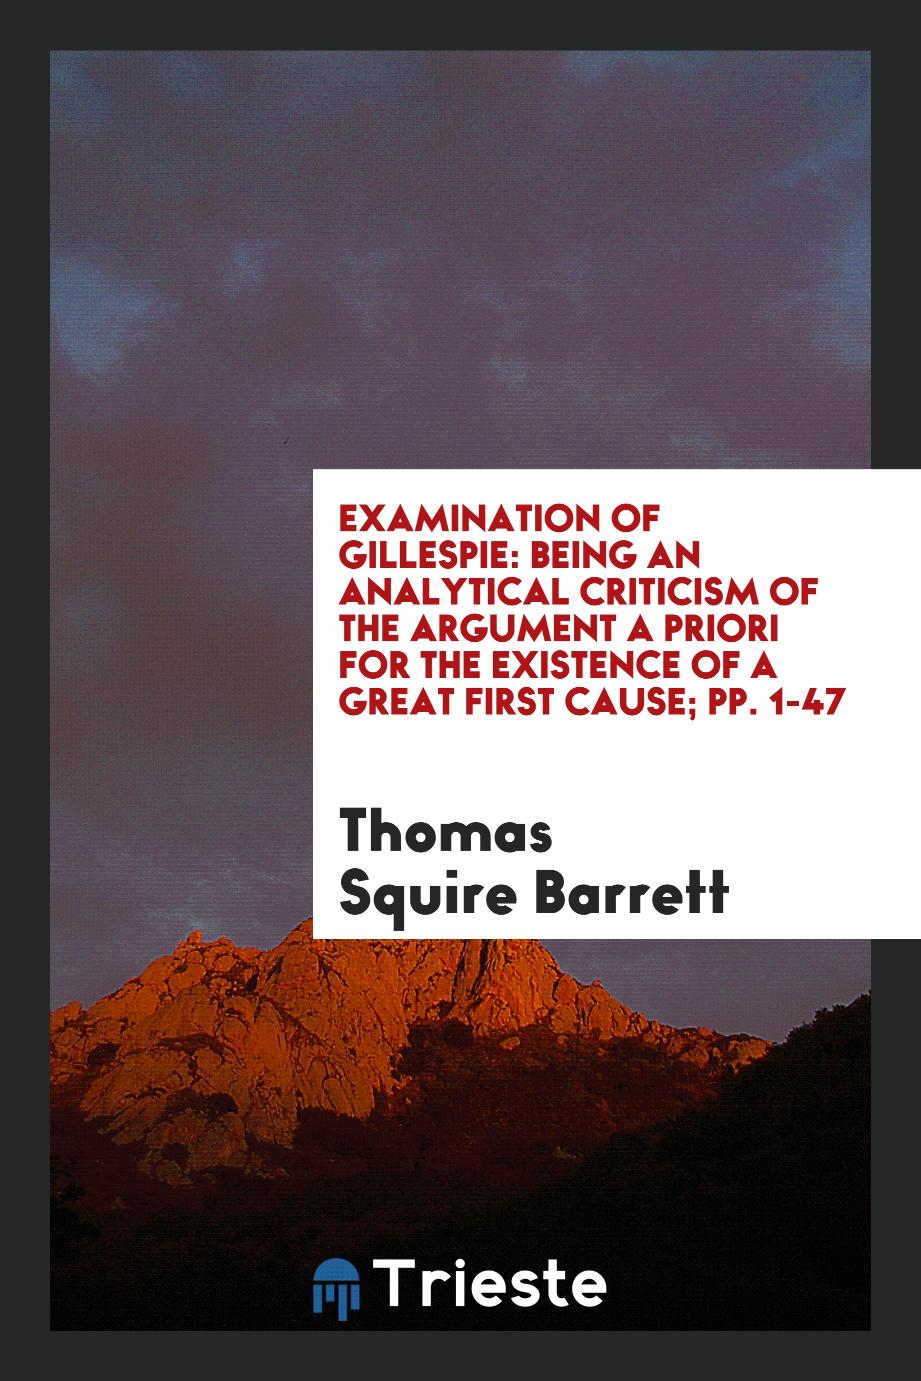 Examination of Gillespie: Being an Analytical Criticism of the Argument a Priori for the existence of a great first cause; pp. 1-47